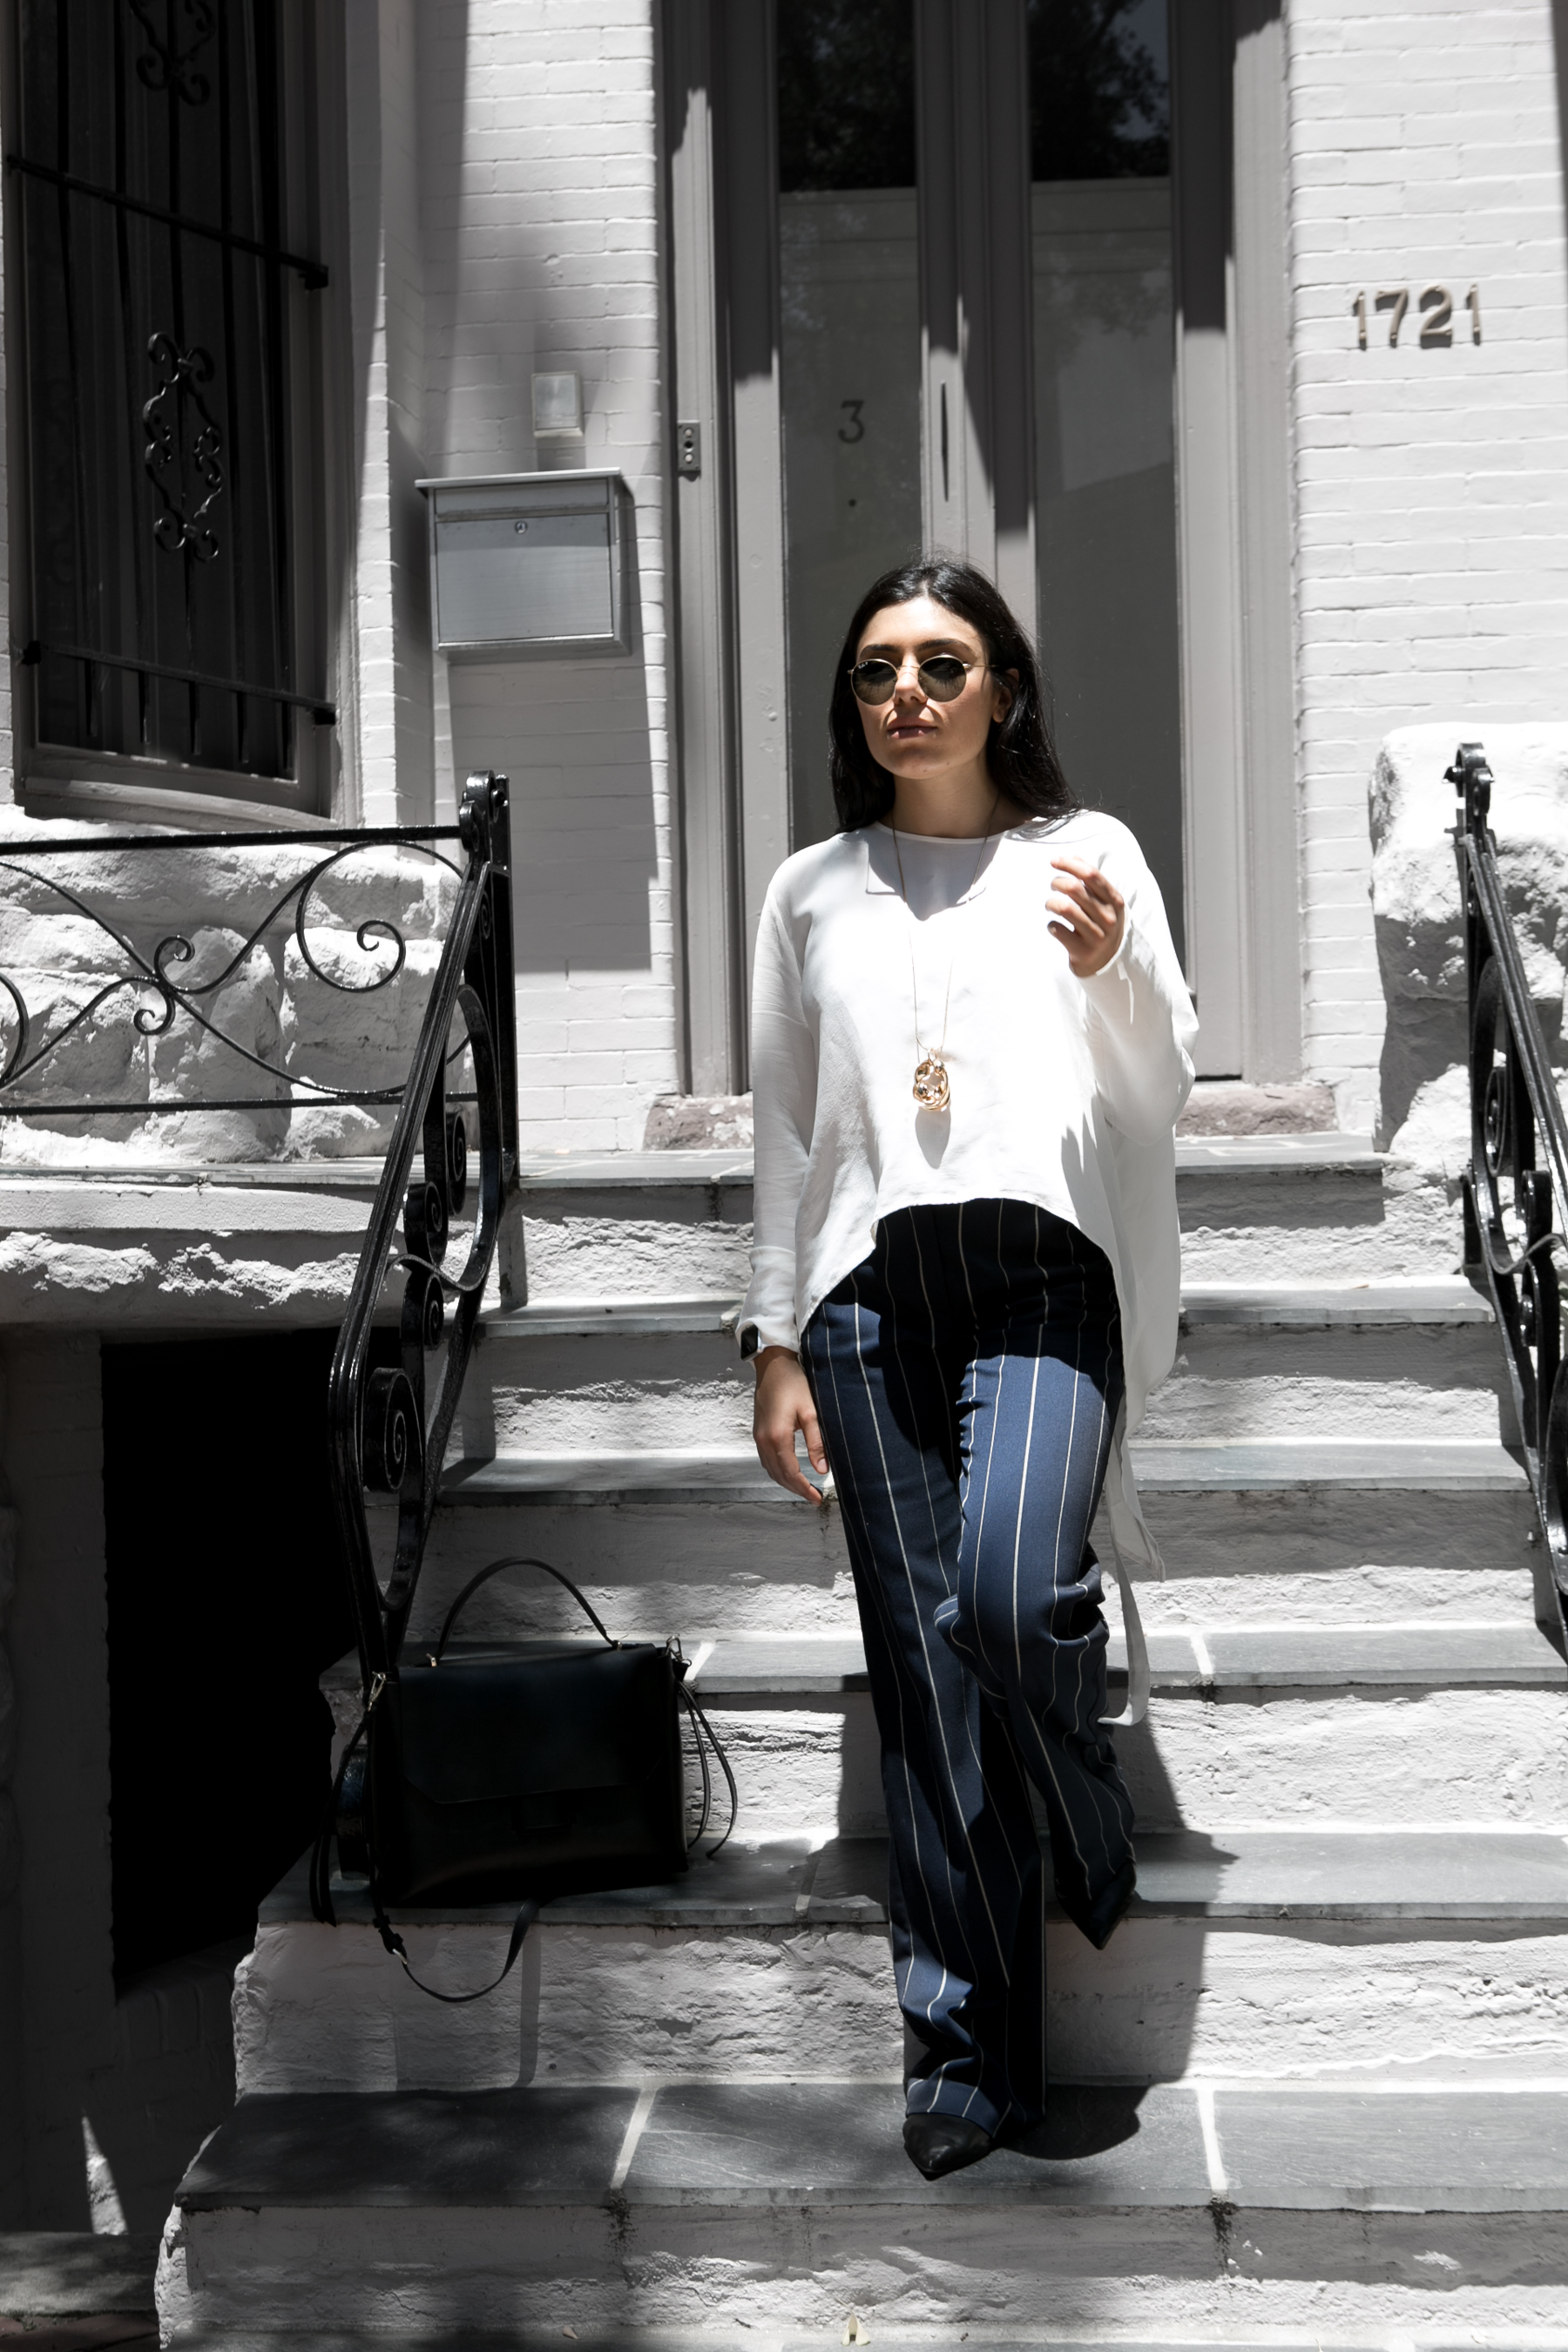 Wide Leg Stripes and white flowing blouse - outfit